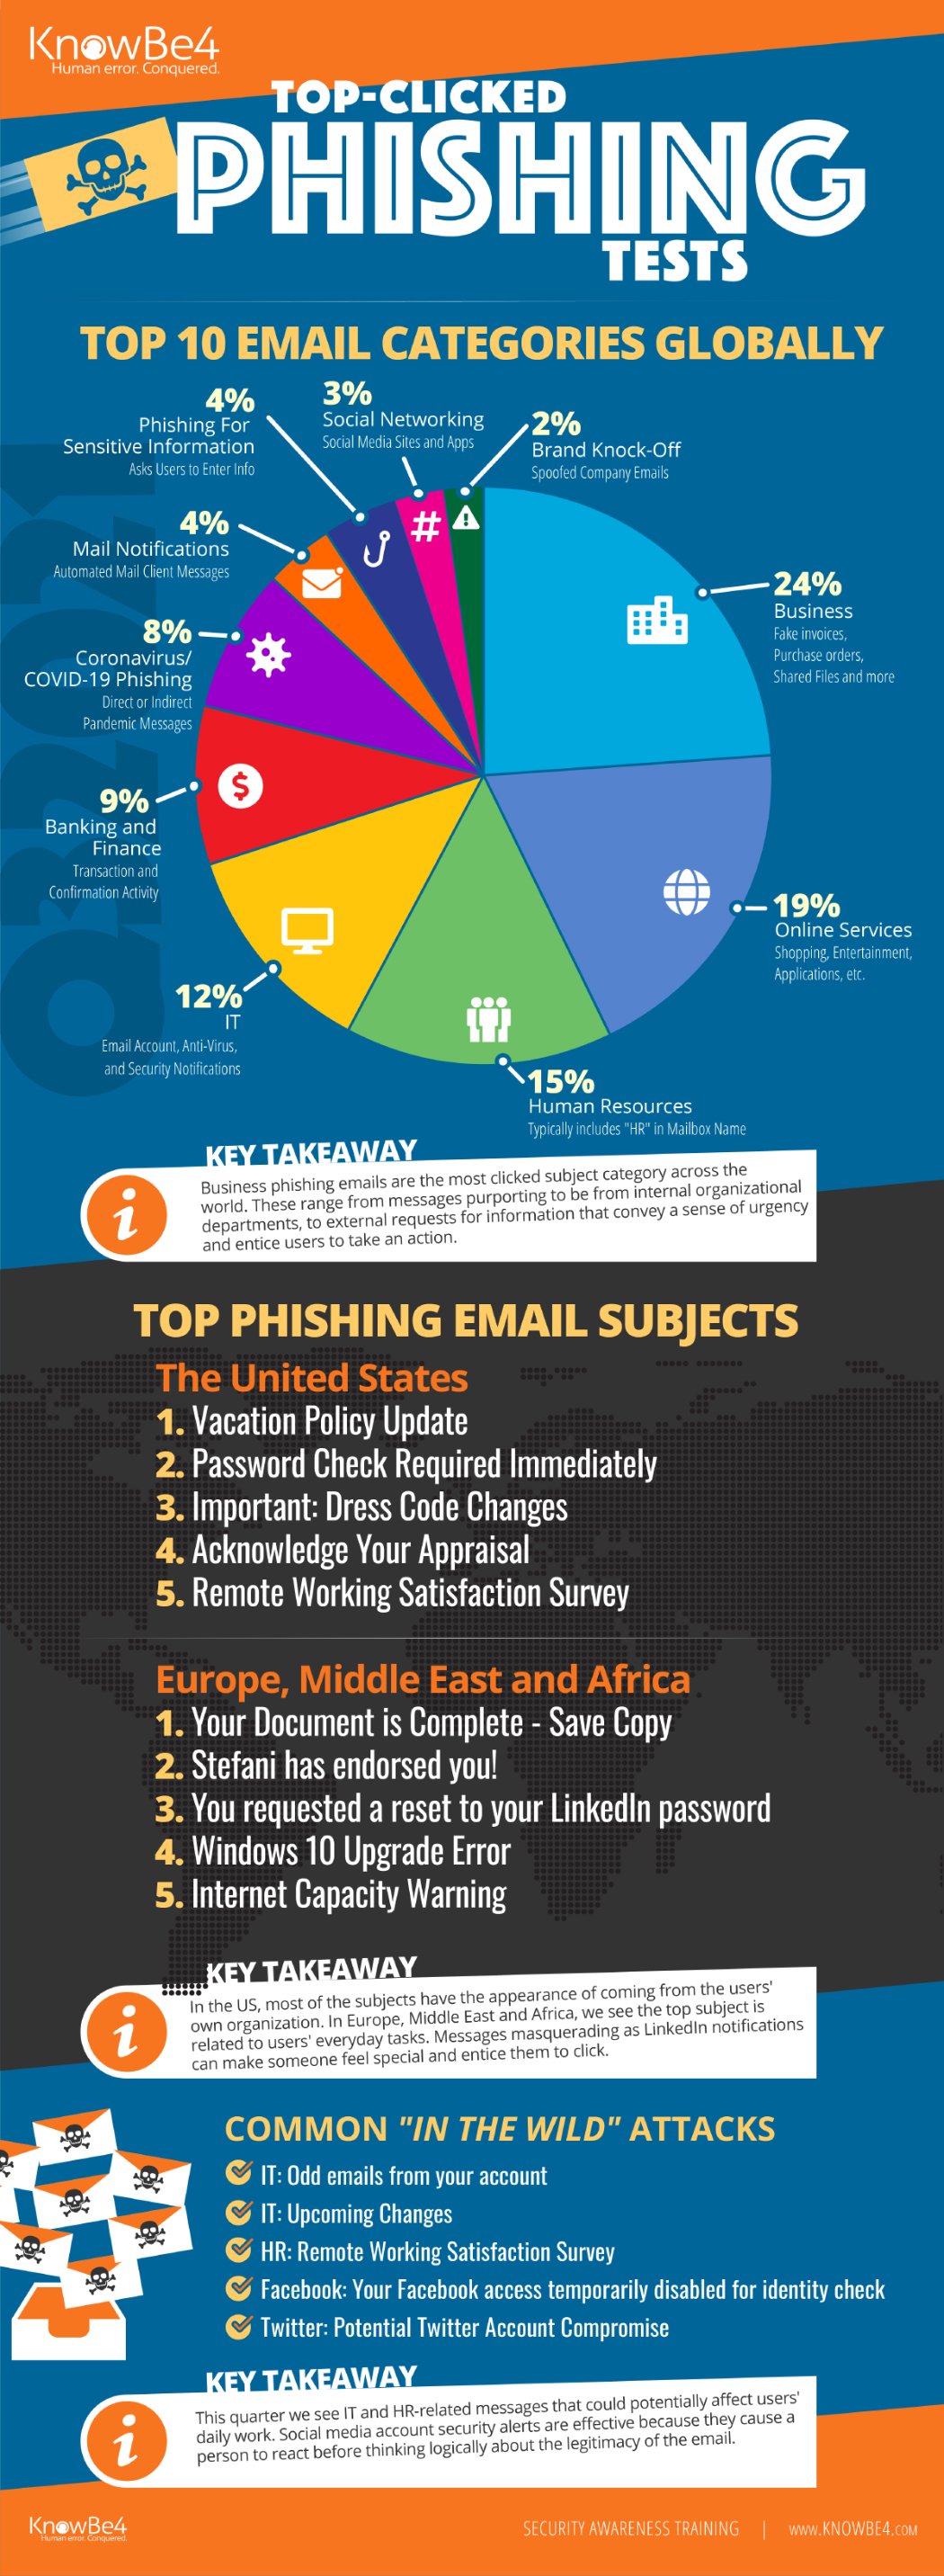 KnowBe4's Q3 2021 Top-Clicked Phishing Email Report